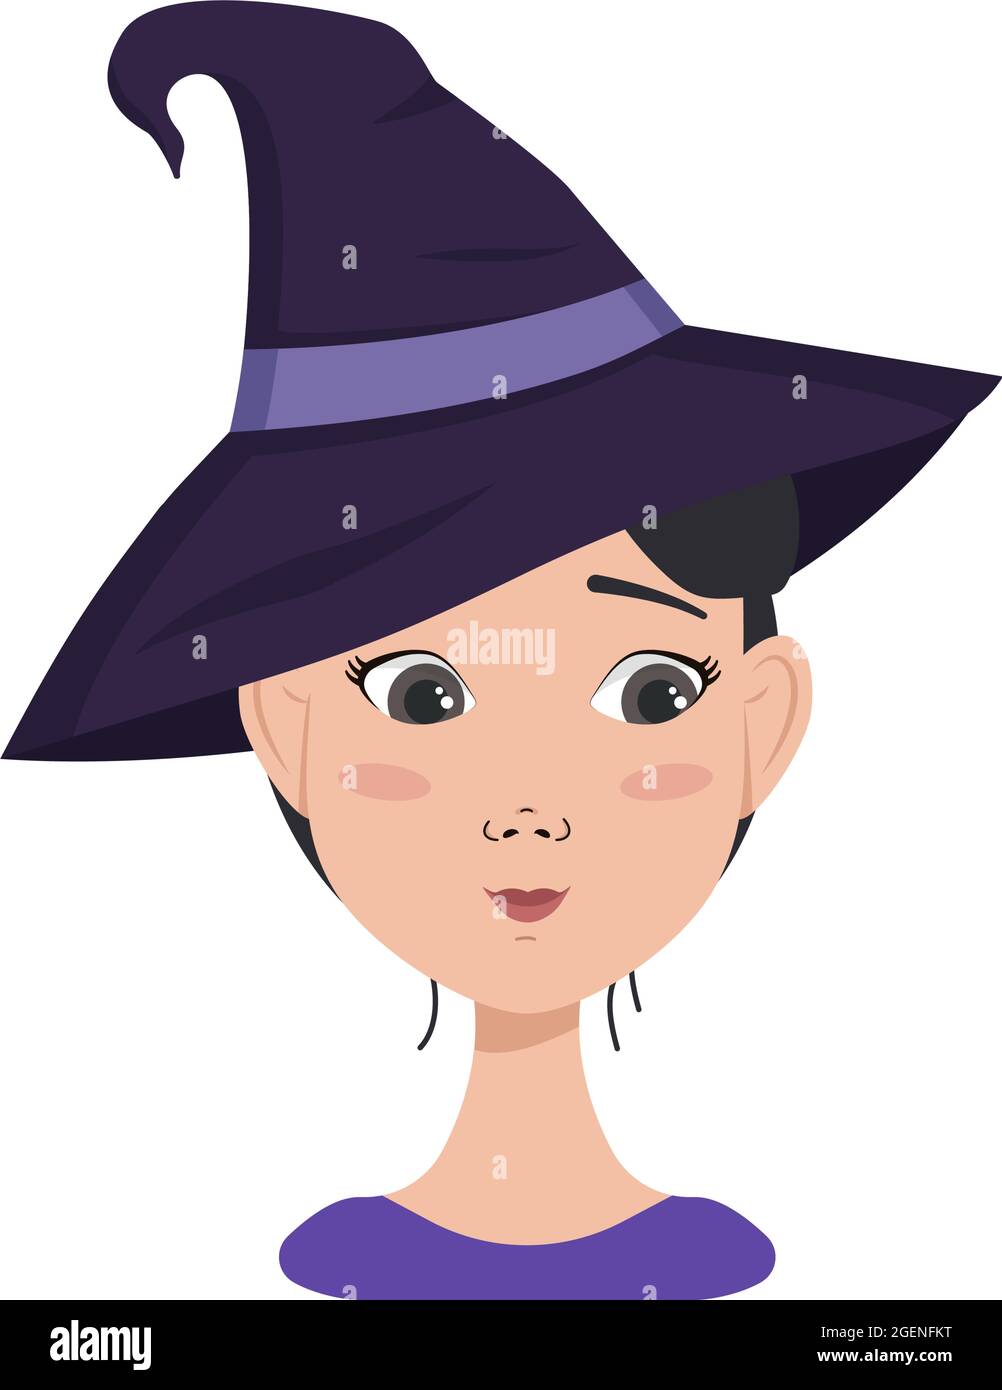 Avatar of asian woman with dark hair, shyness emotions, embarrassed face and downcast eyes, wearing a witch hat. Halloween character in costume Stock Vector